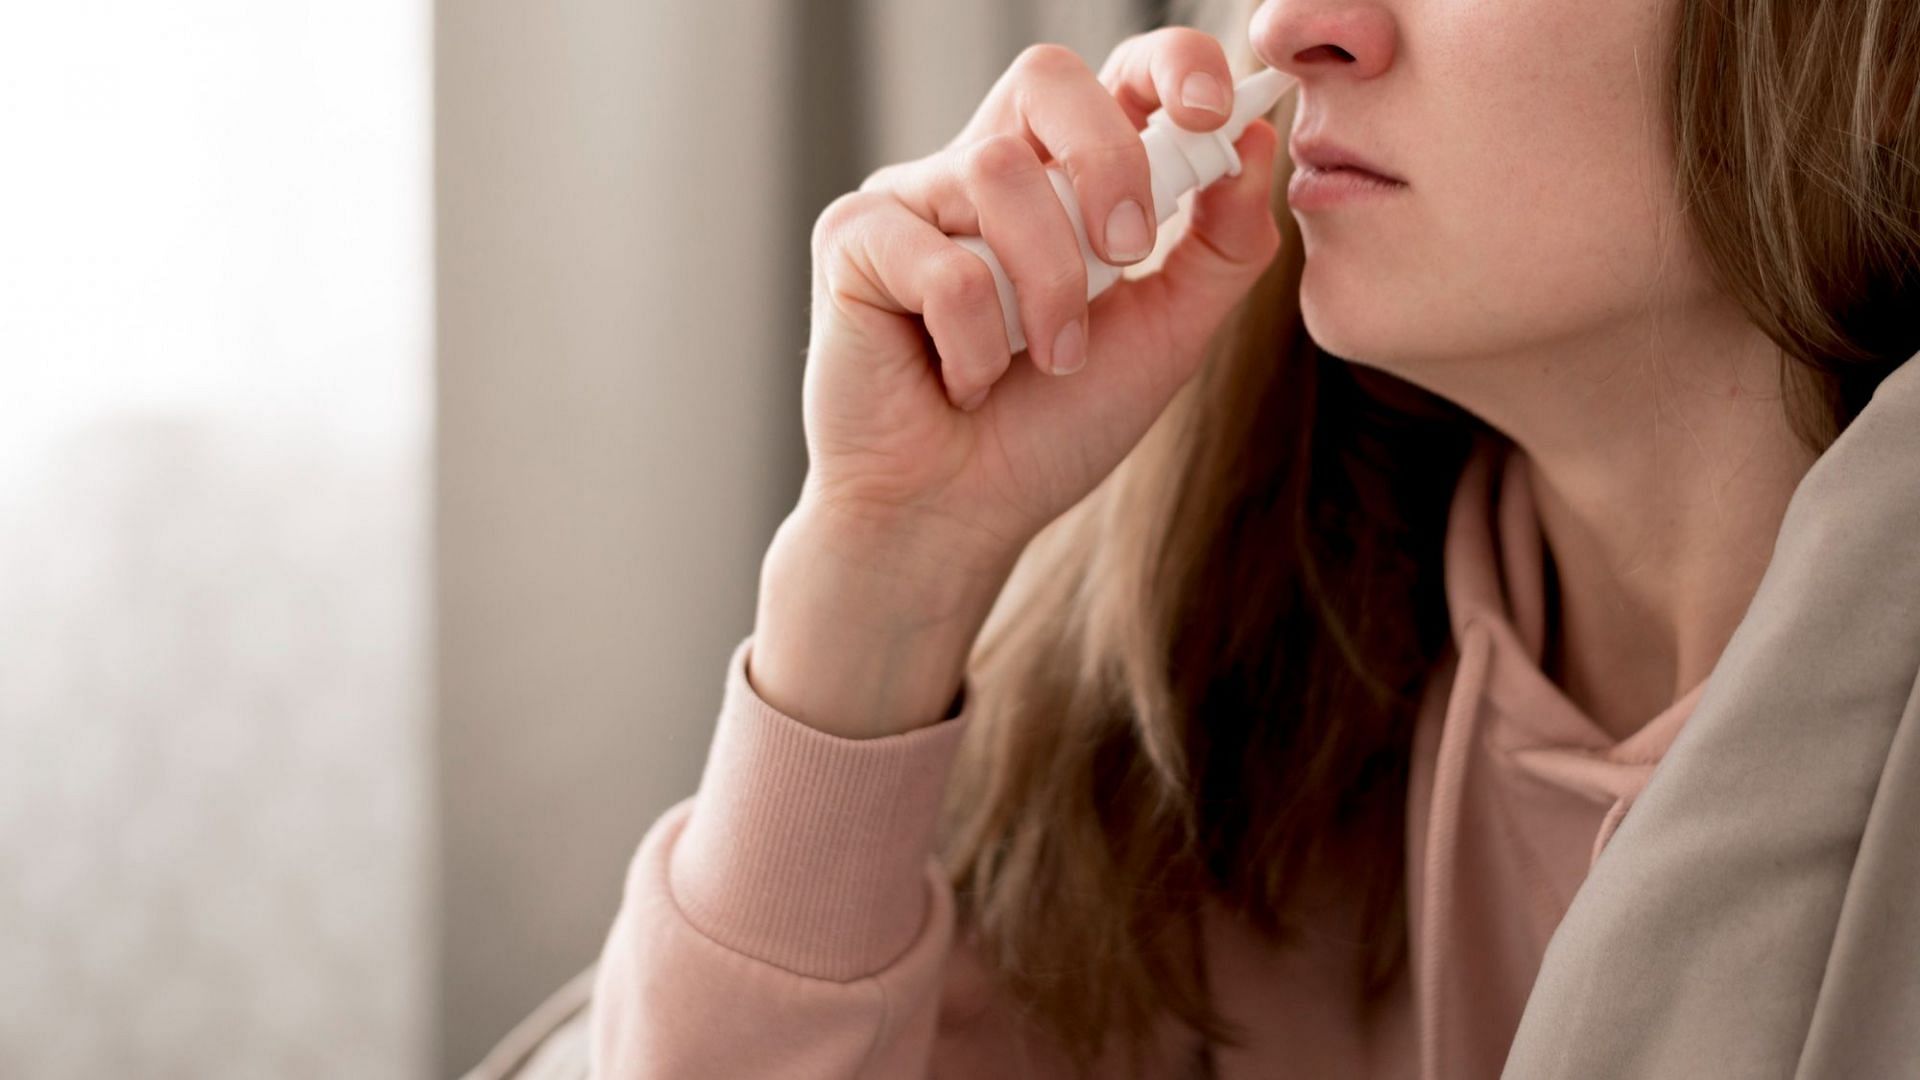 Nasal decongestants can clear out blocked tear ducts. (Image via Freepik)